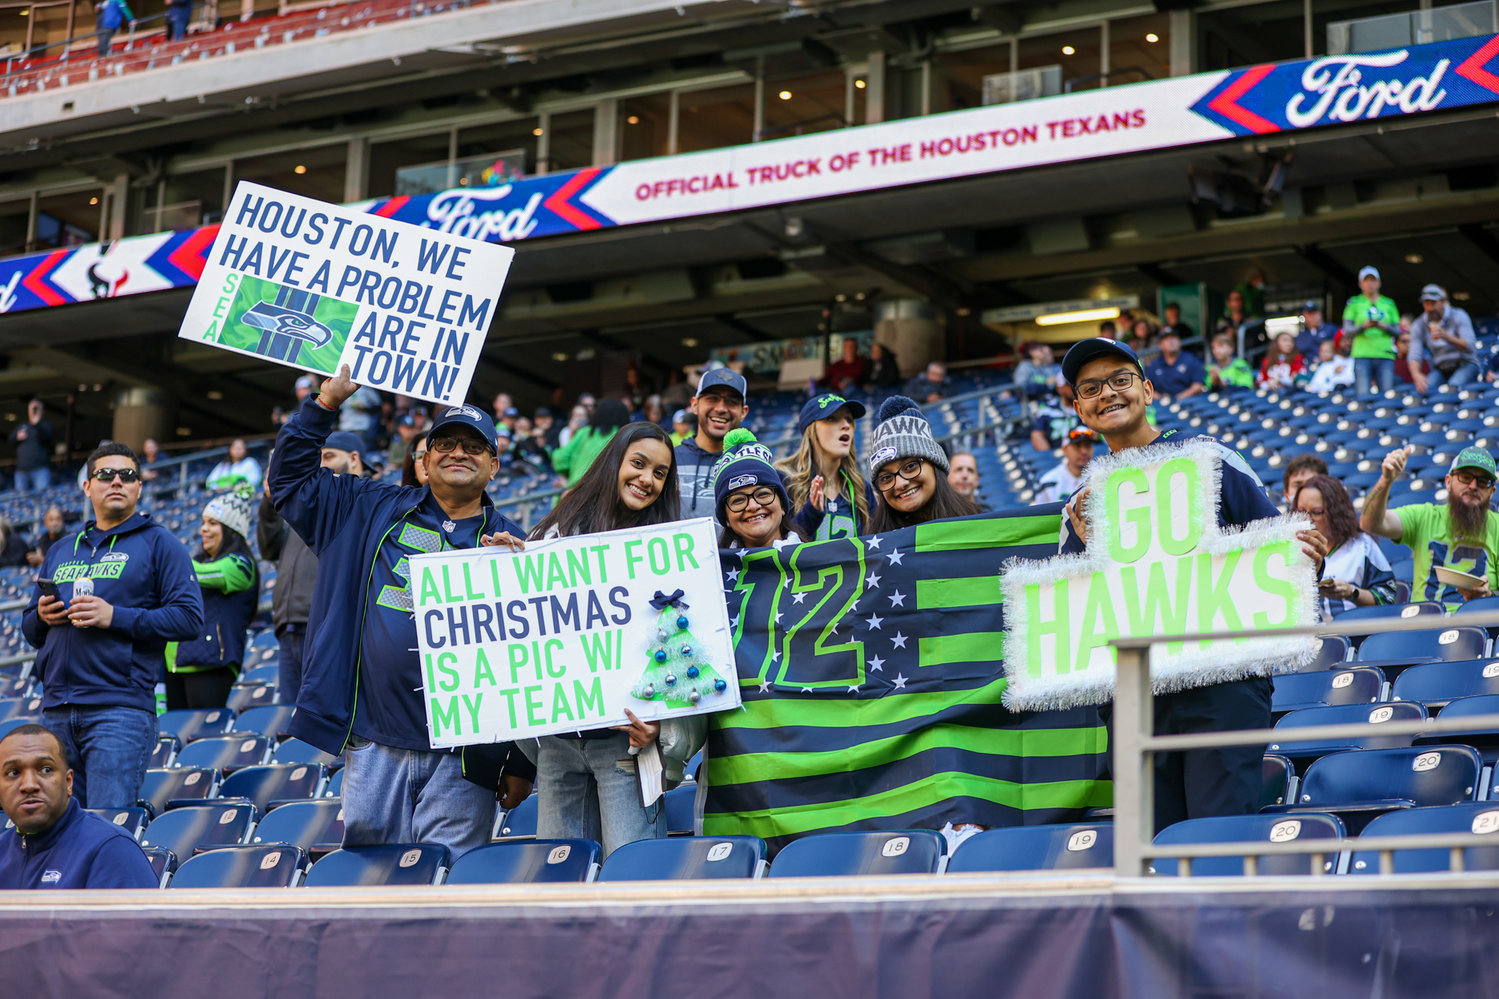 Seahawks fans outnumber Texans fans in the stadium before the start of an NFL game on December 12, 2021 in Houston, Texas.